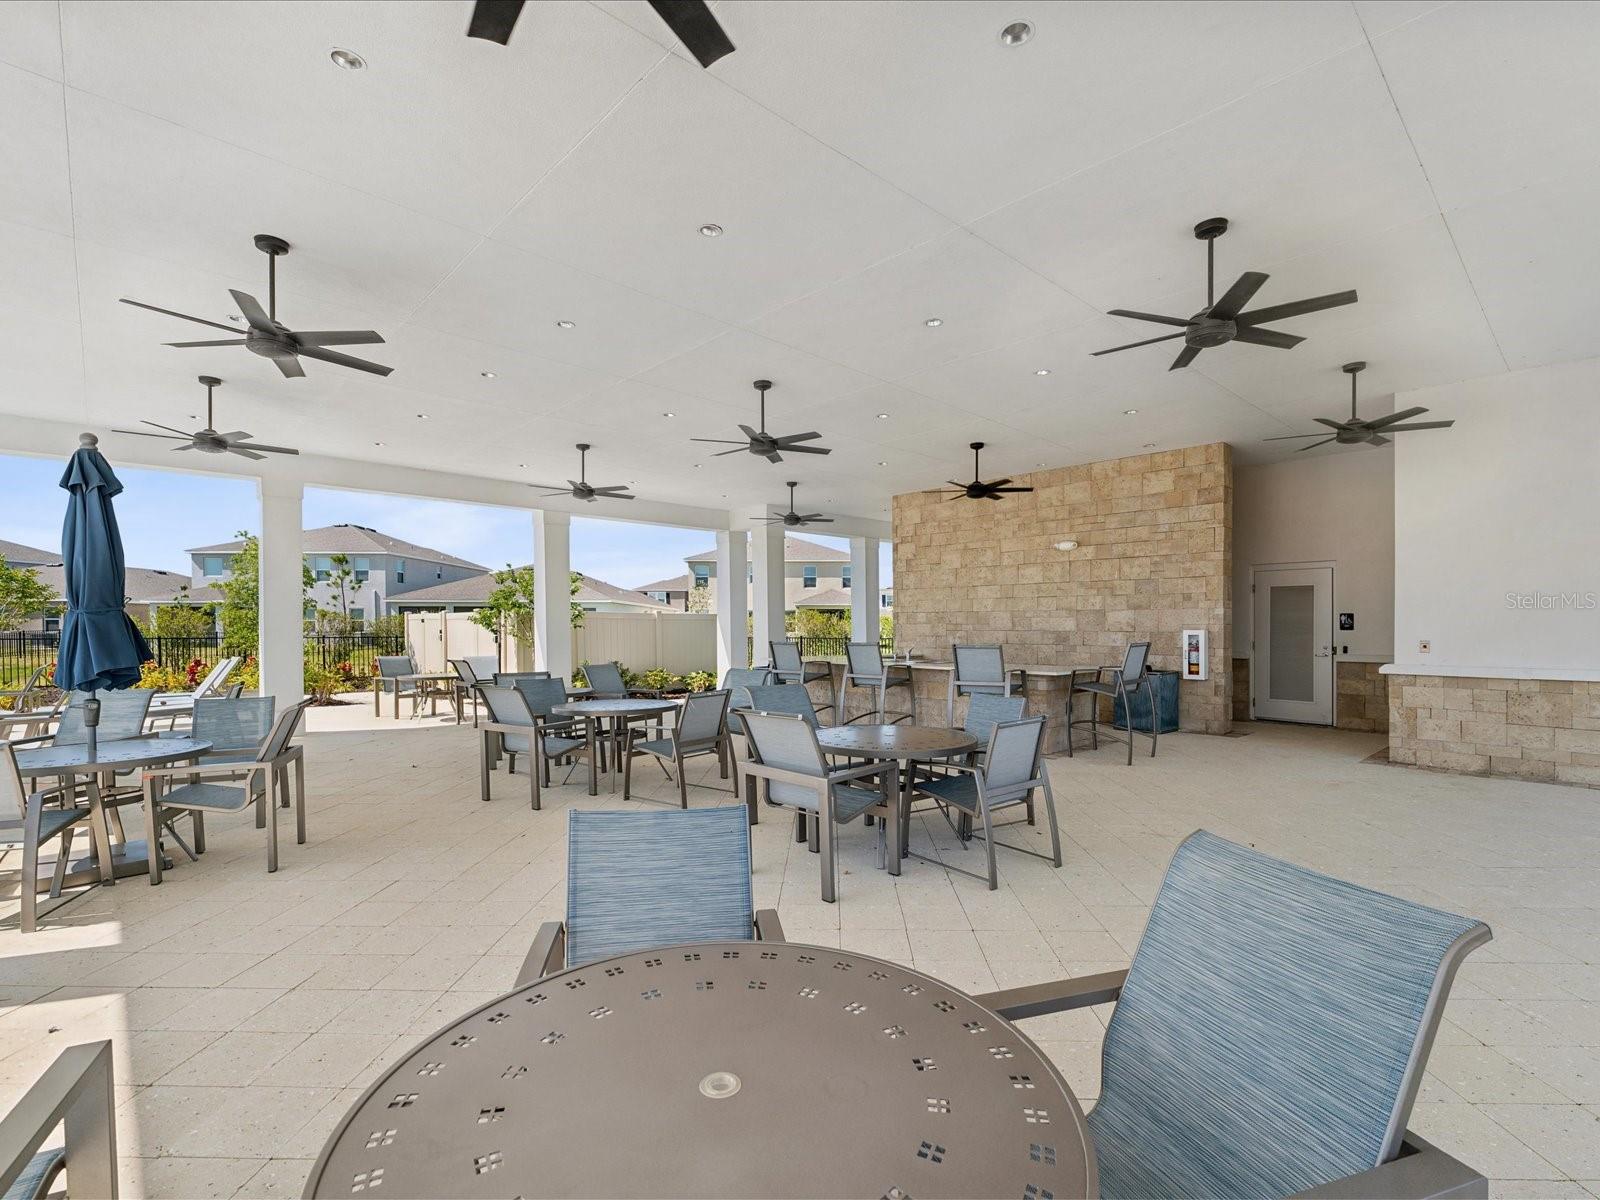 Multiple seating areas in the patio allow you to relax and enjoy some downtime away from all the fun in the sun.